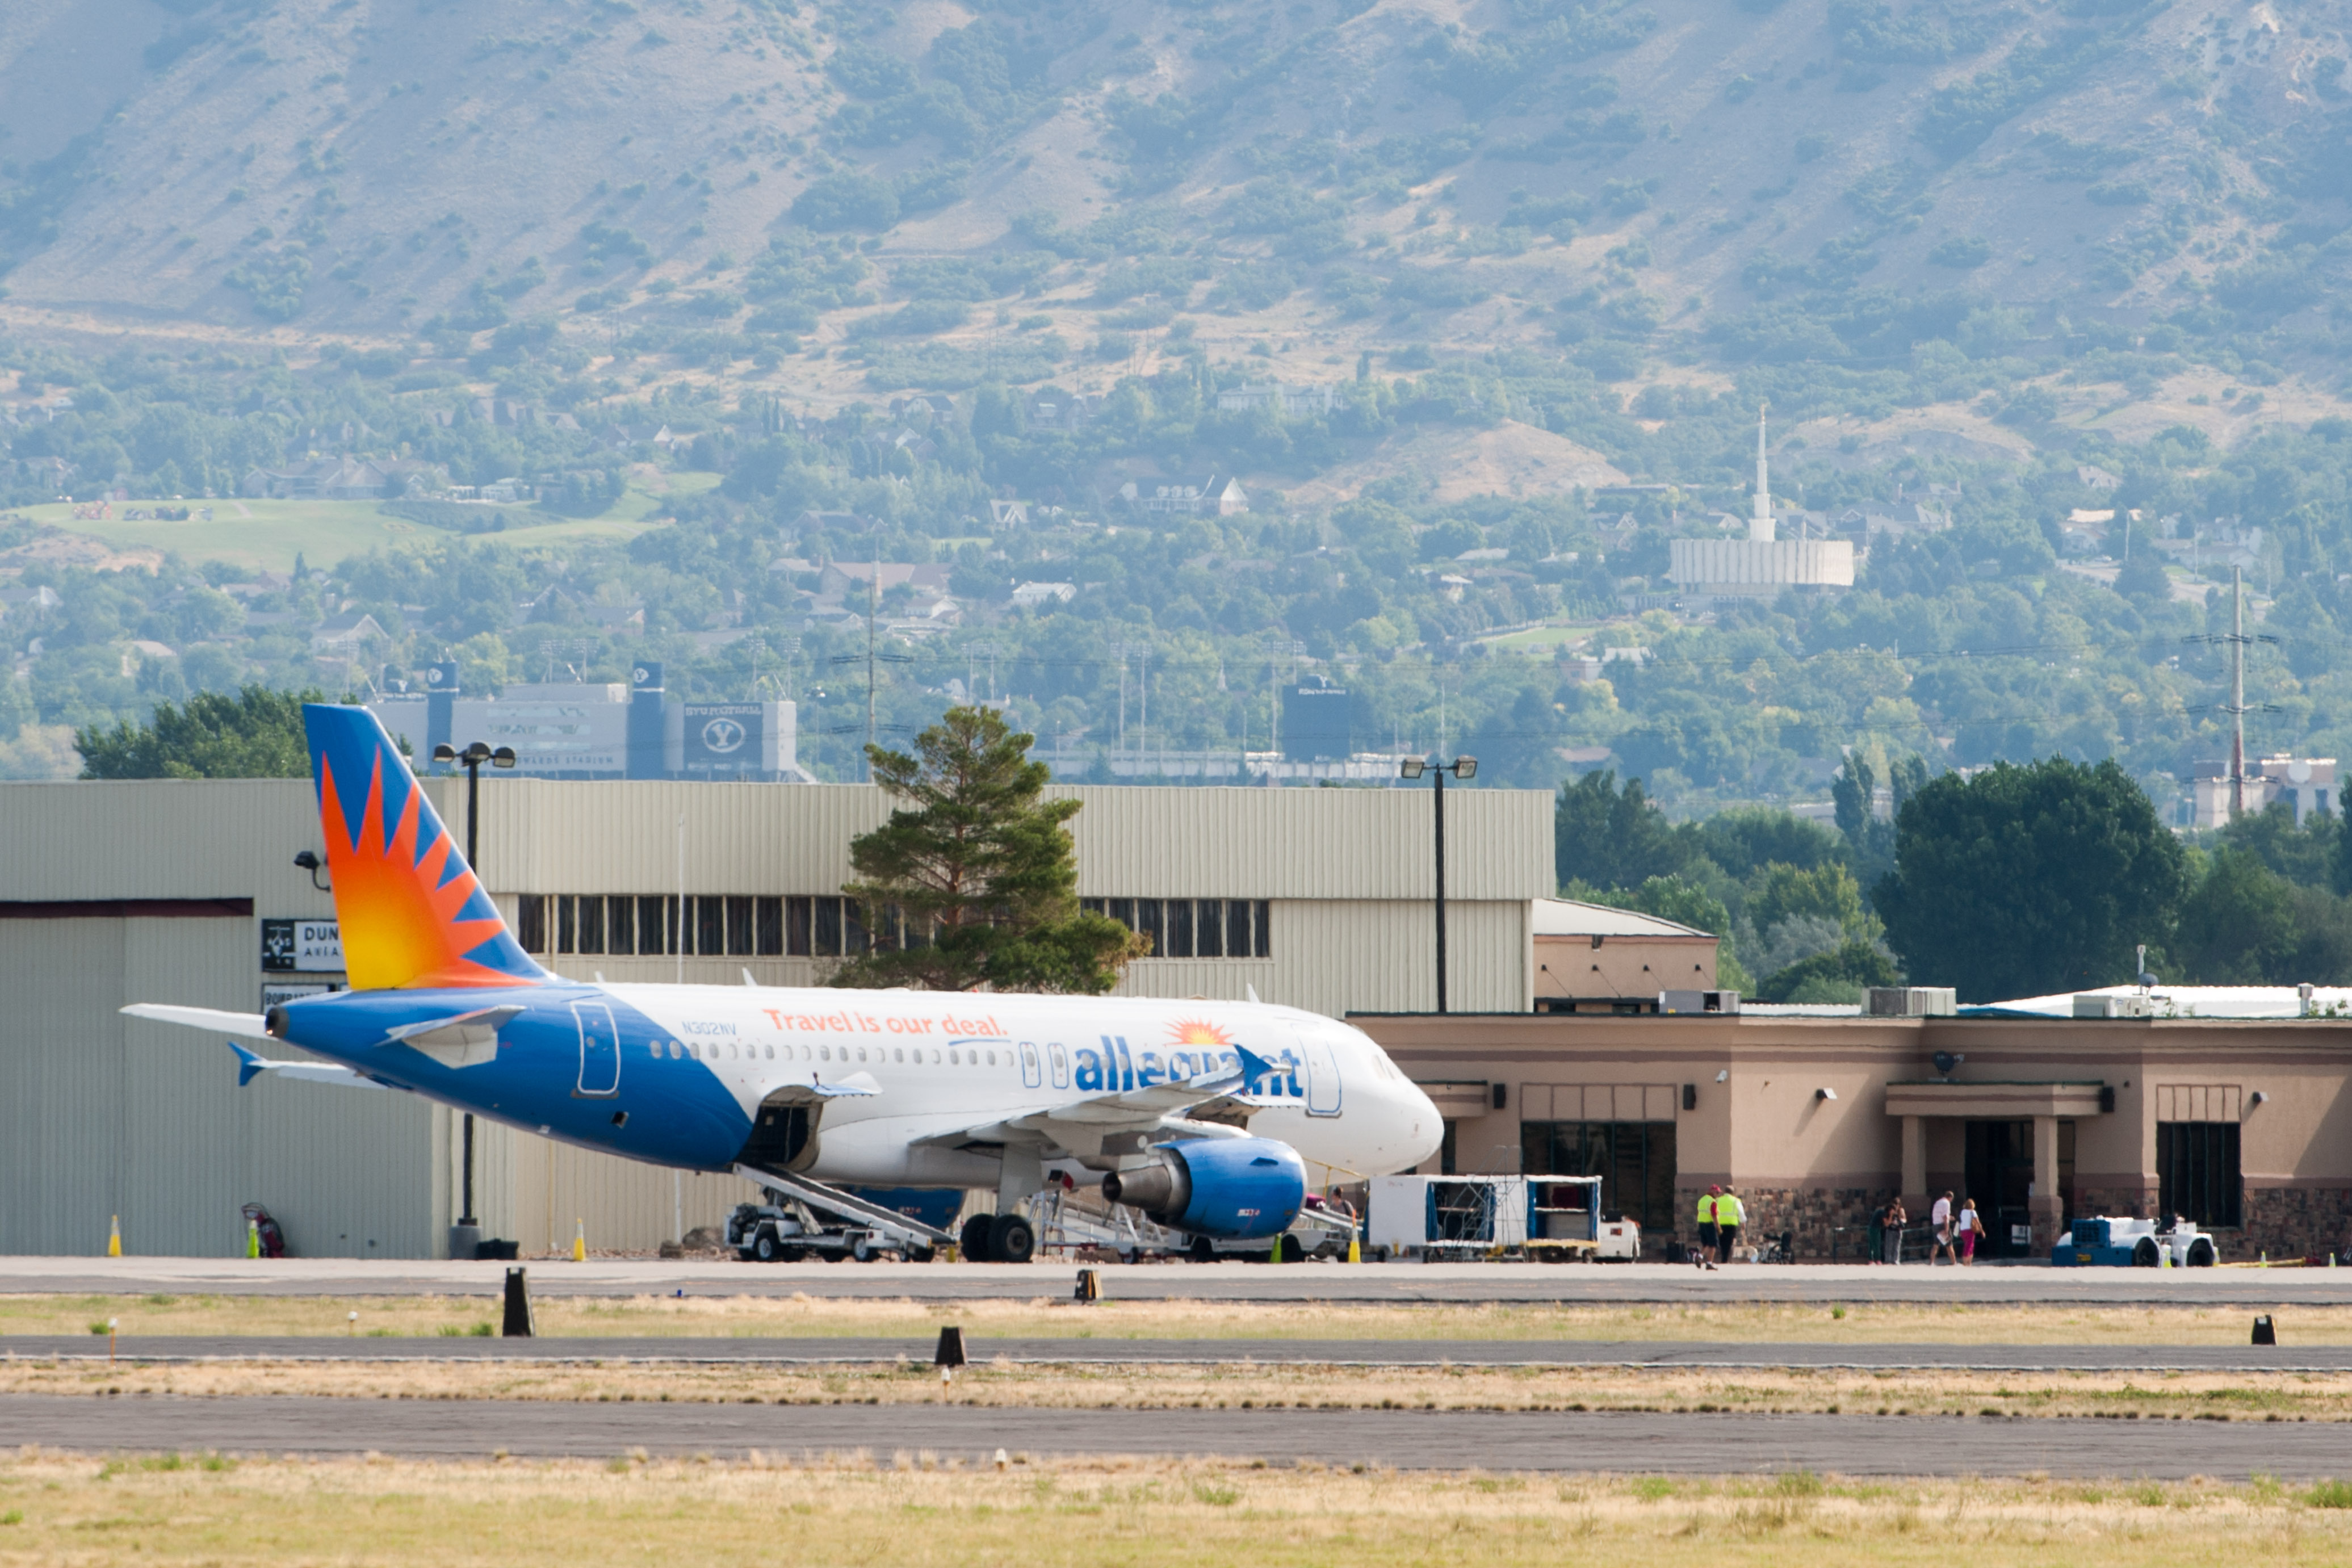 What are some cities Allegiant Air flys to out of Ogden, Utah?